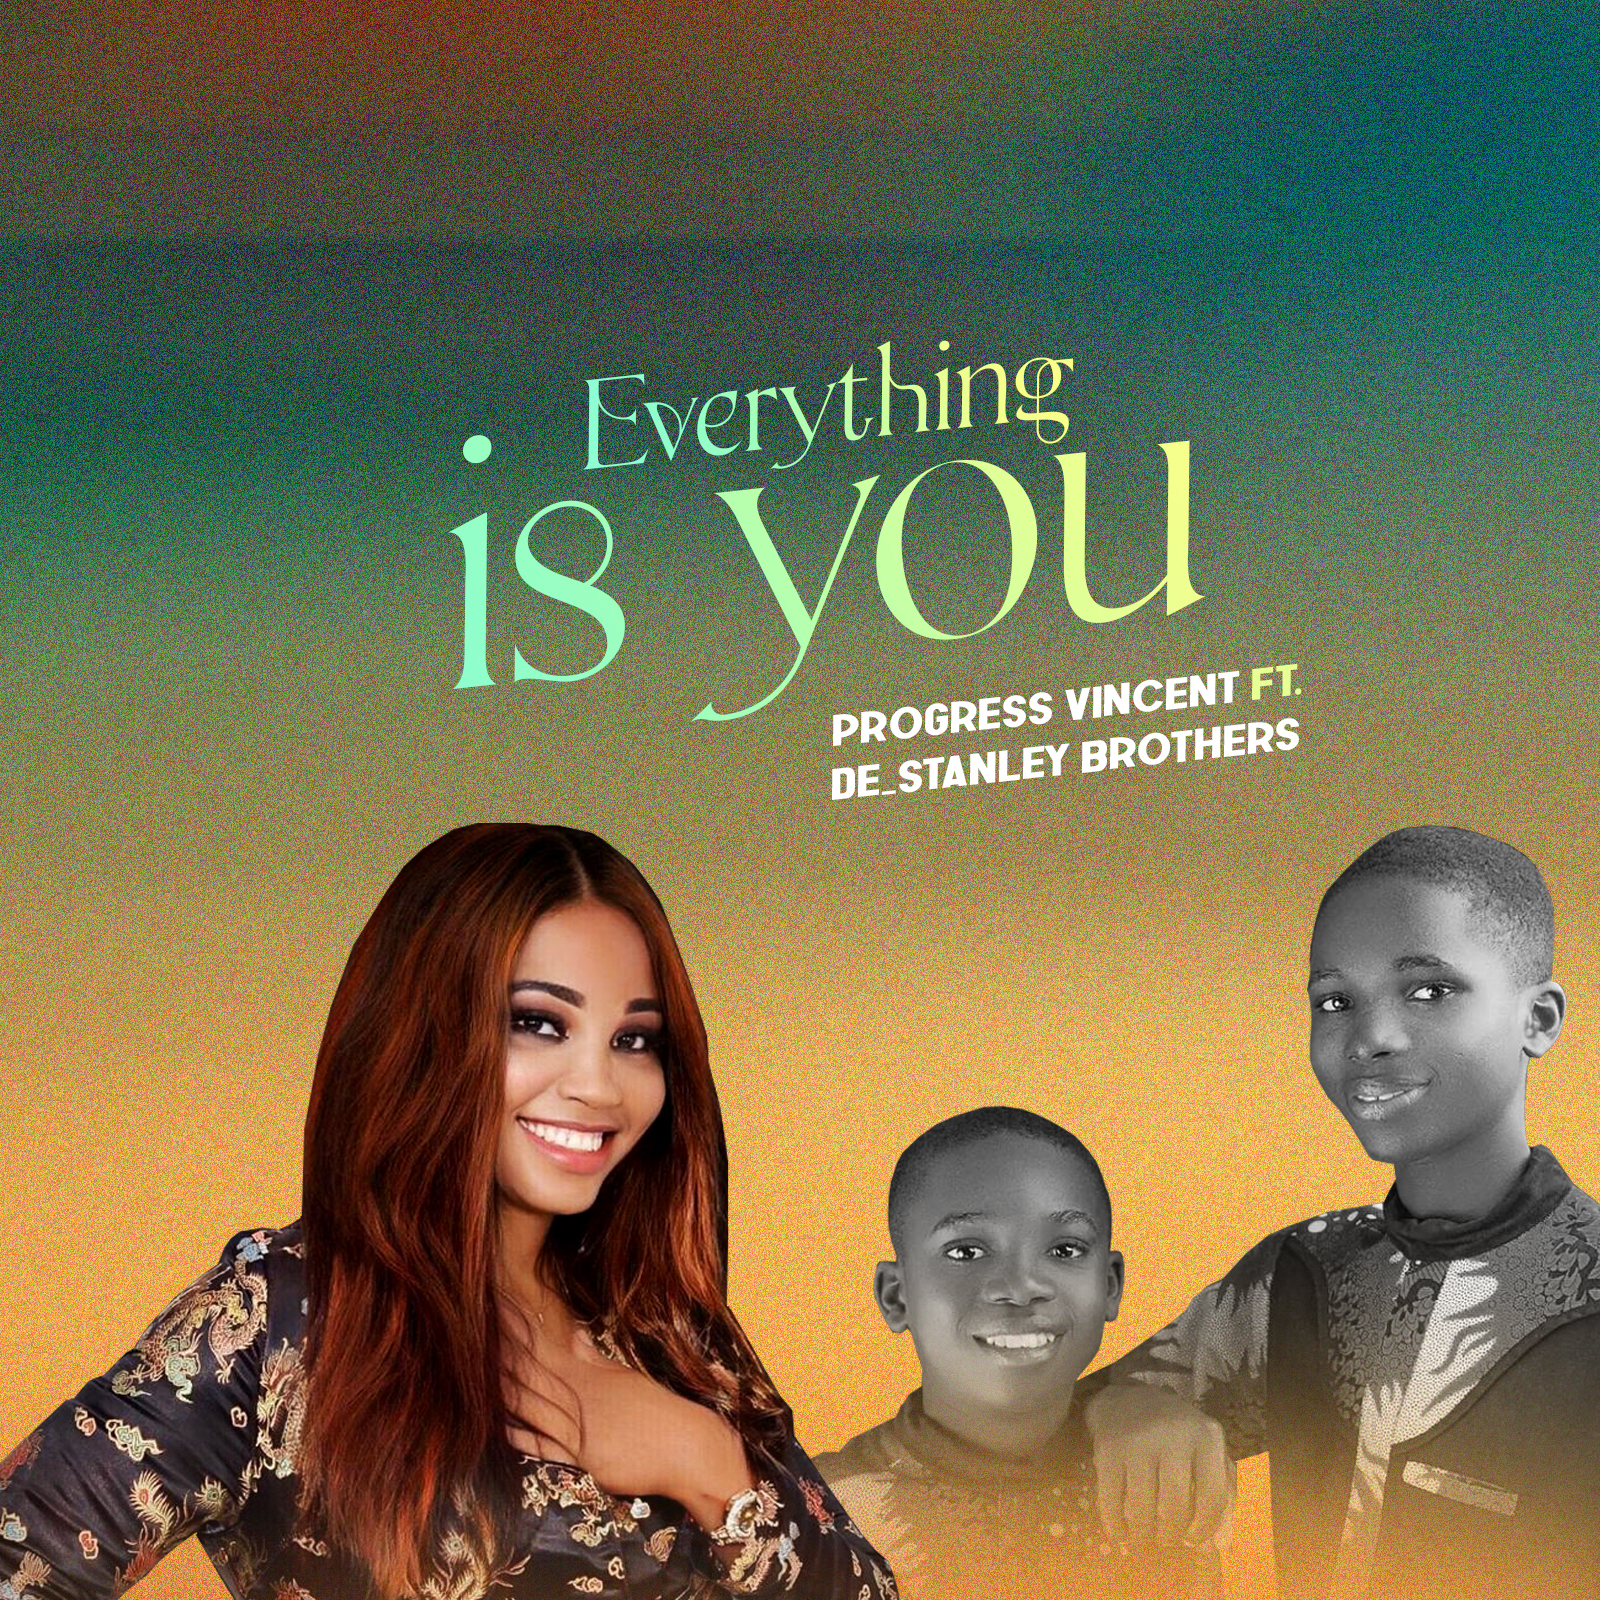 Download Mp3: Progress Vincent - Everything Is You ft De Stanley Brothers